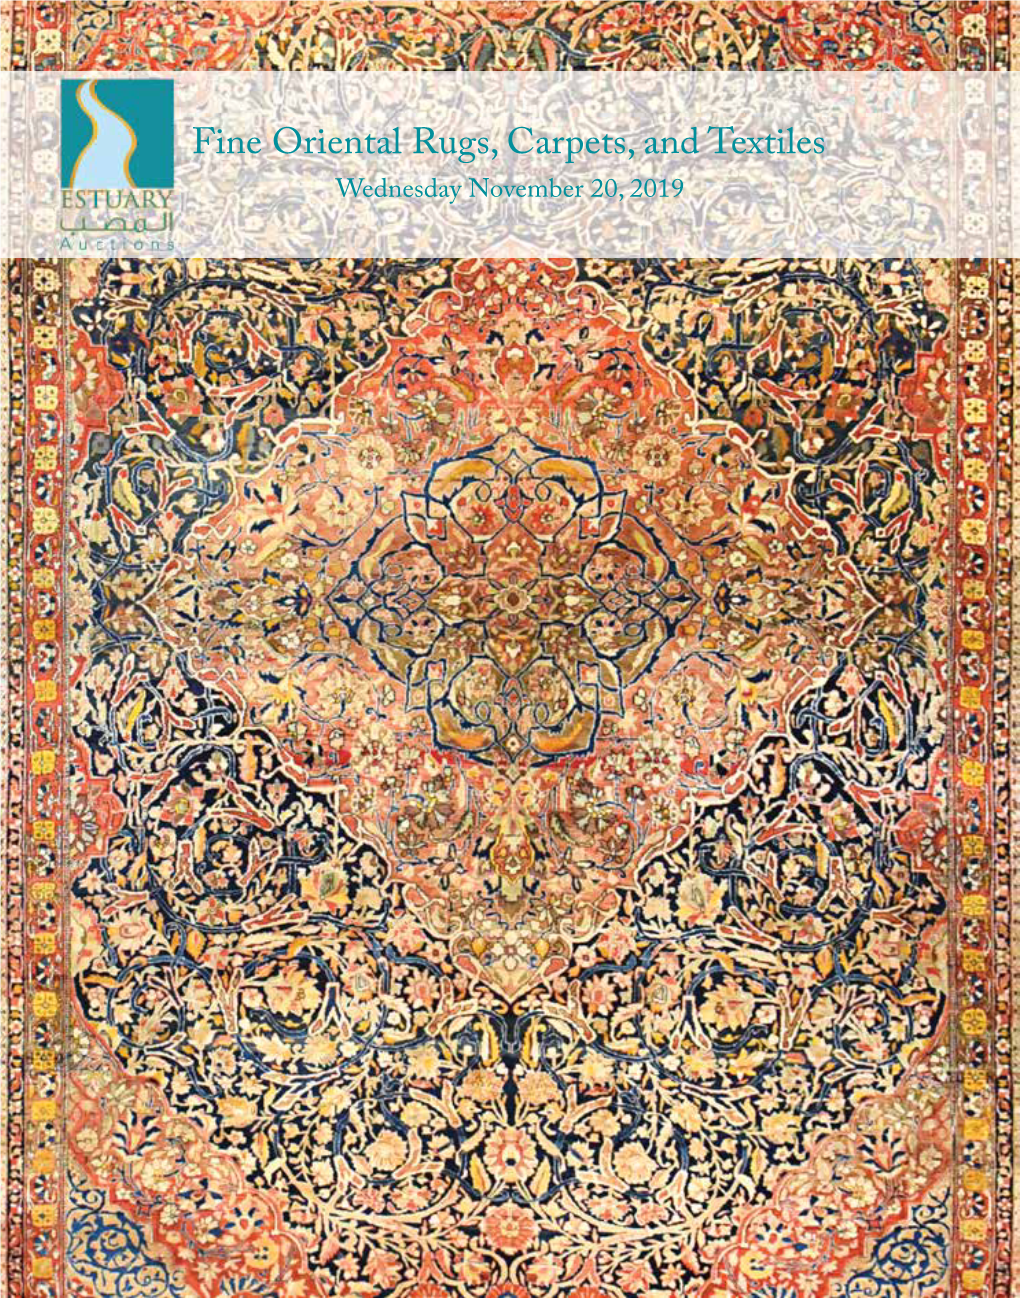 Fine Oriental Rugs, Carpets, and Textiles November 20, 2019